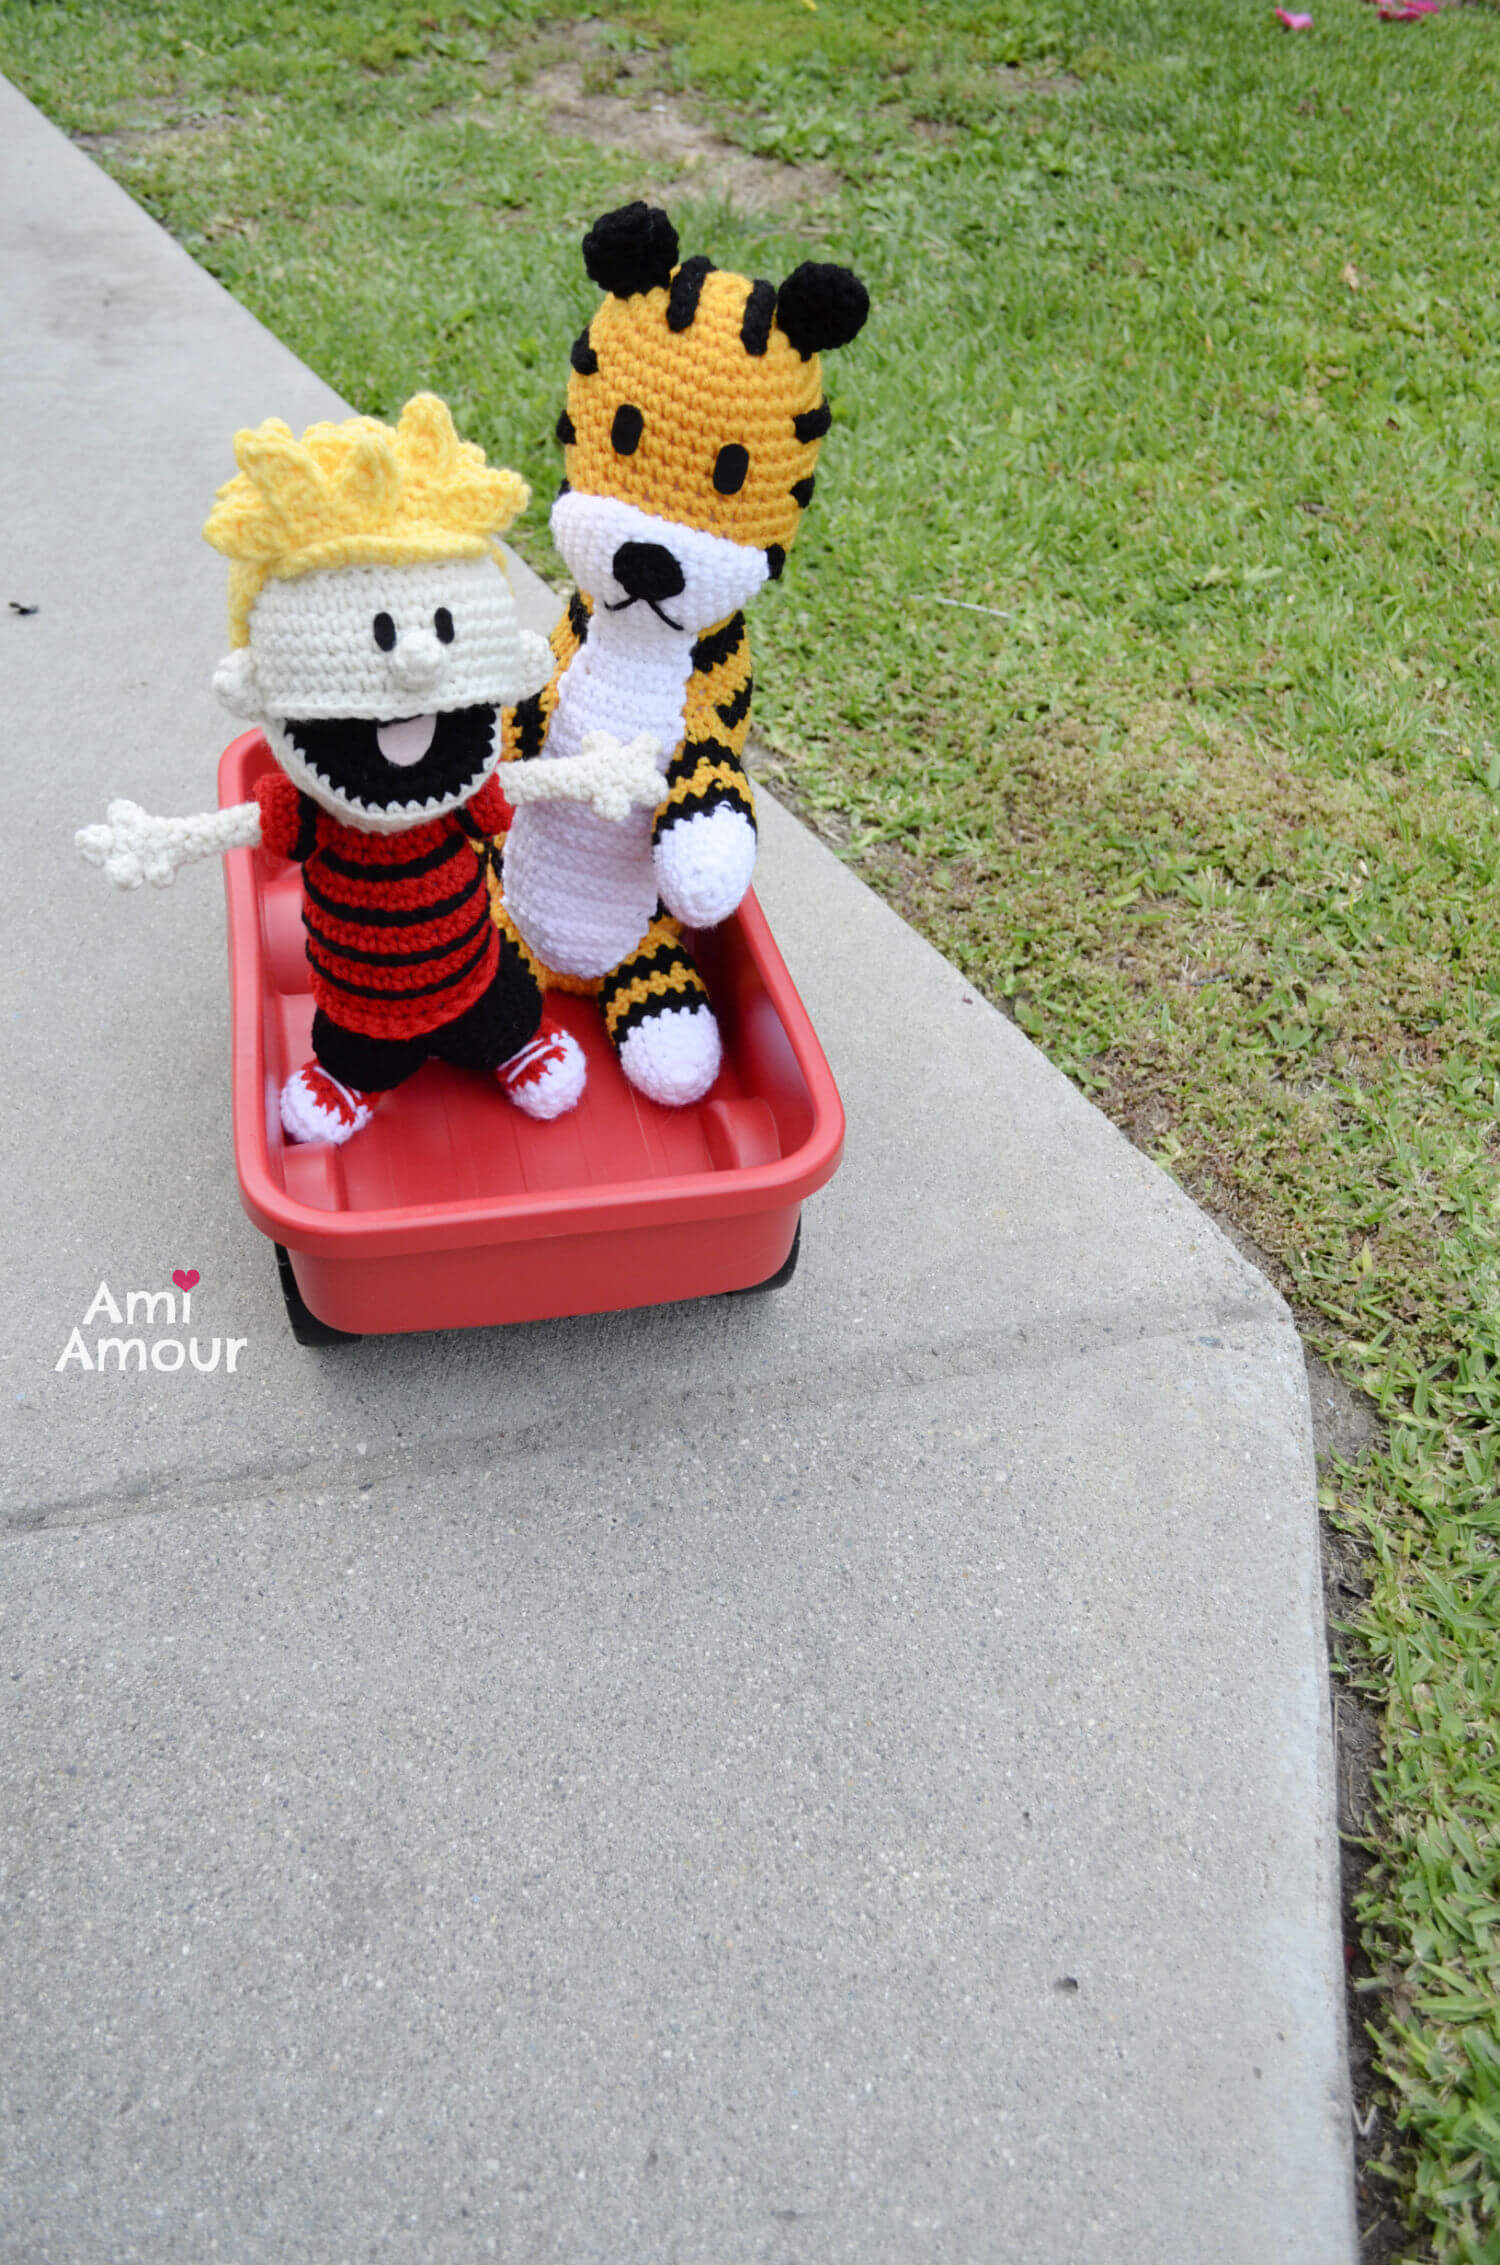 Calvin and Hobbes on a Wagon Ride